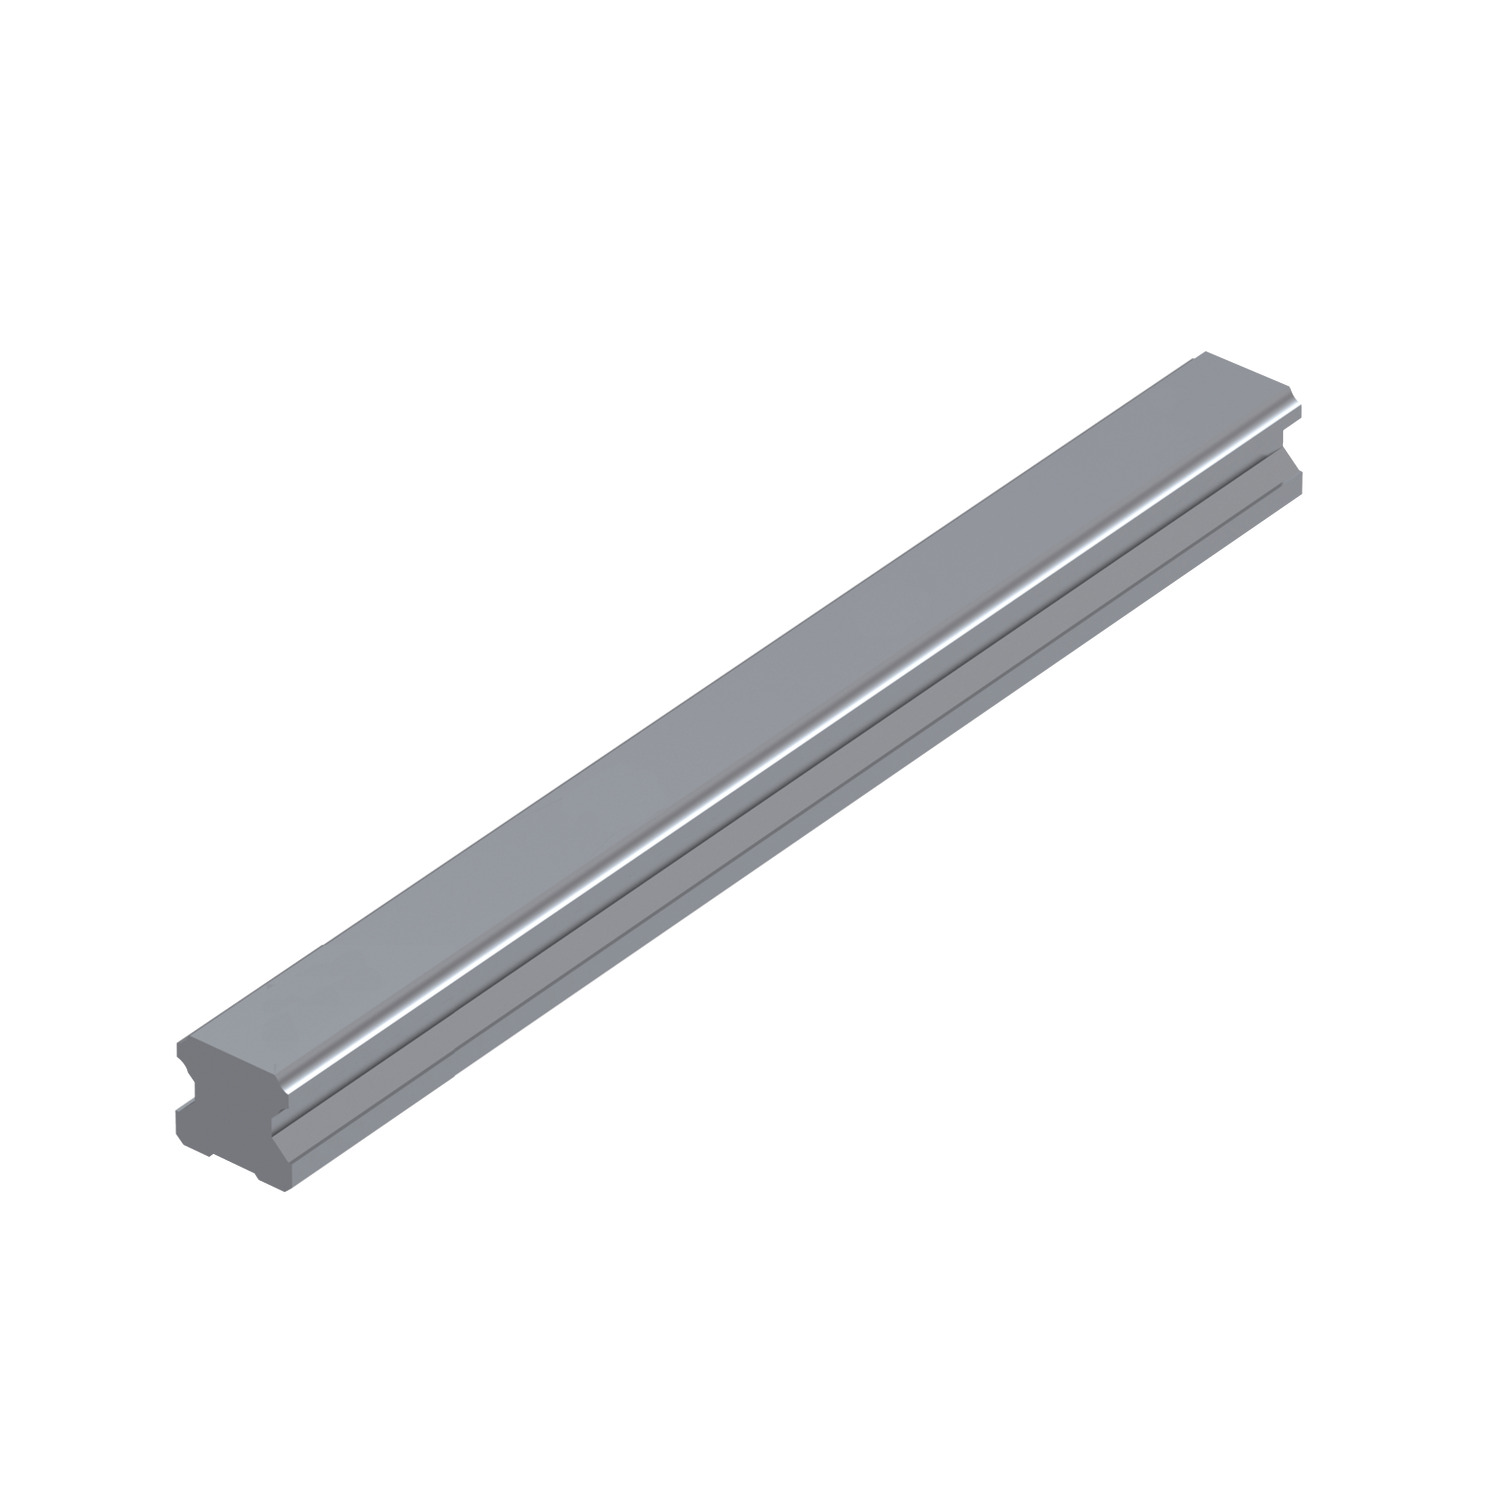 L1016.RF20-0160 Linear guide rail rear fixing 20mm 0160 Hardened and ground steel. EC:20166670 WG:05063055295321